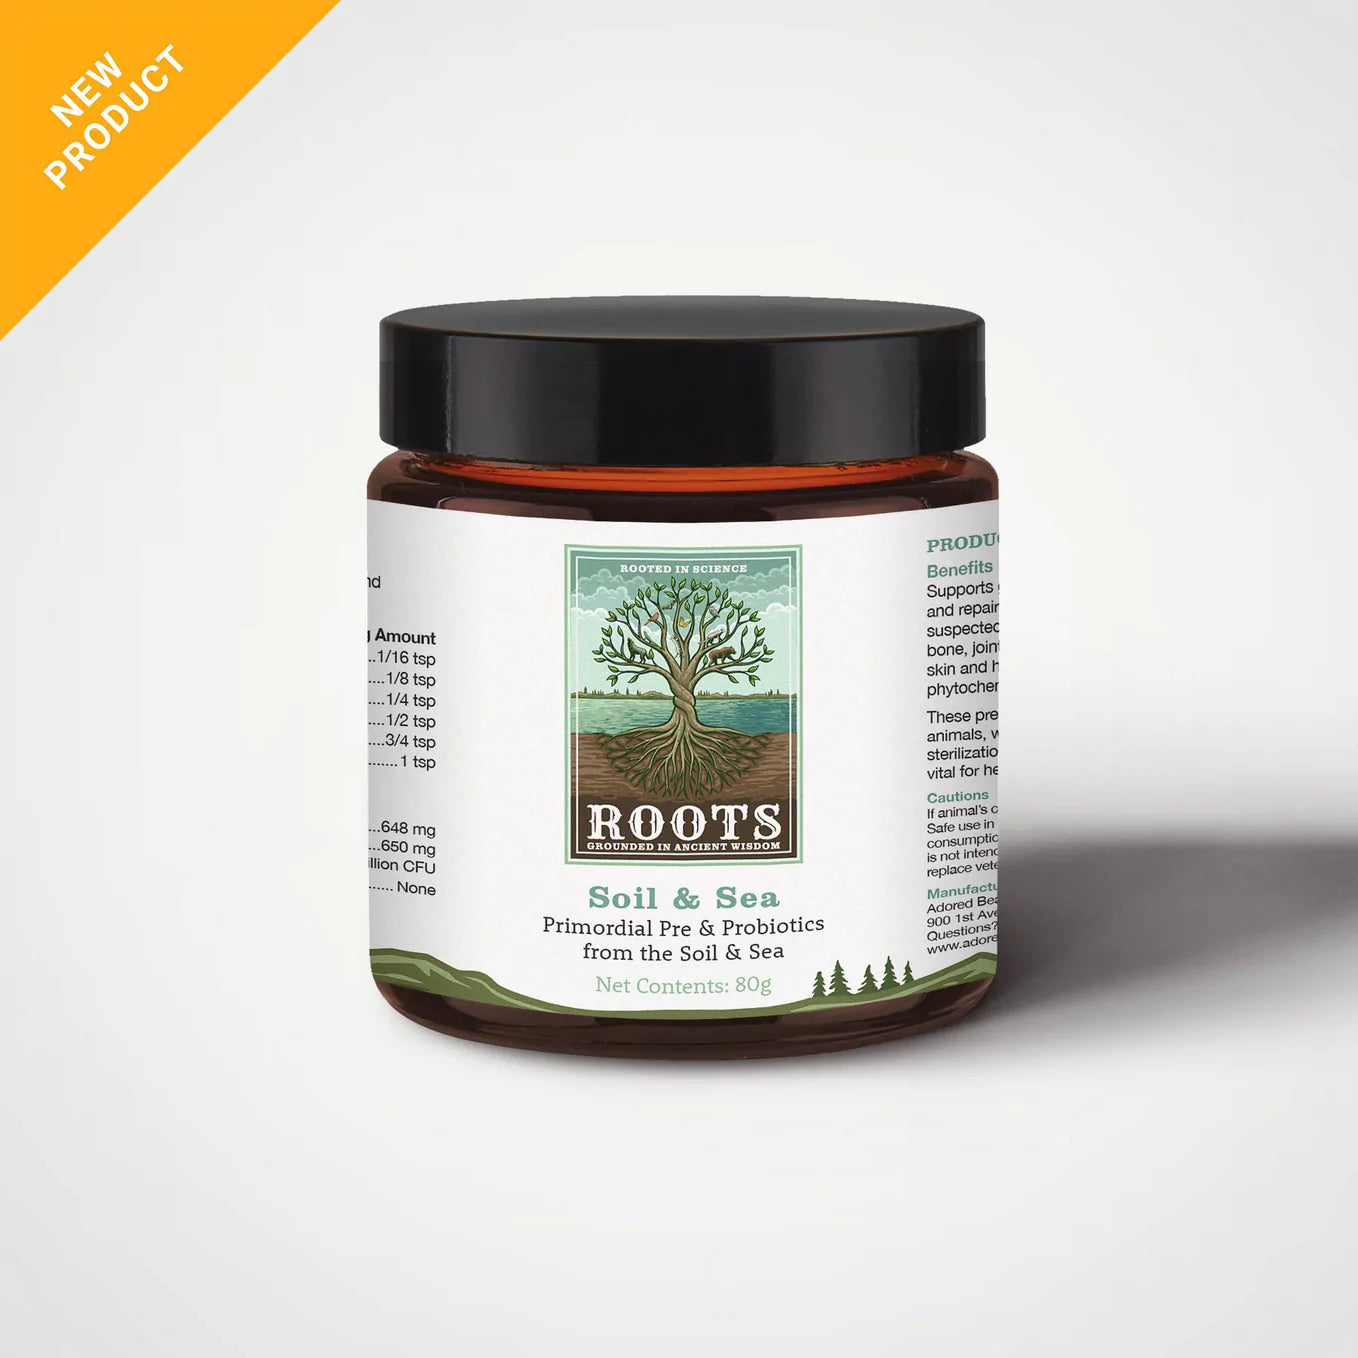 Adored Beast Roots Soil & Sea Probiotic 40g-Four Muddy Paws